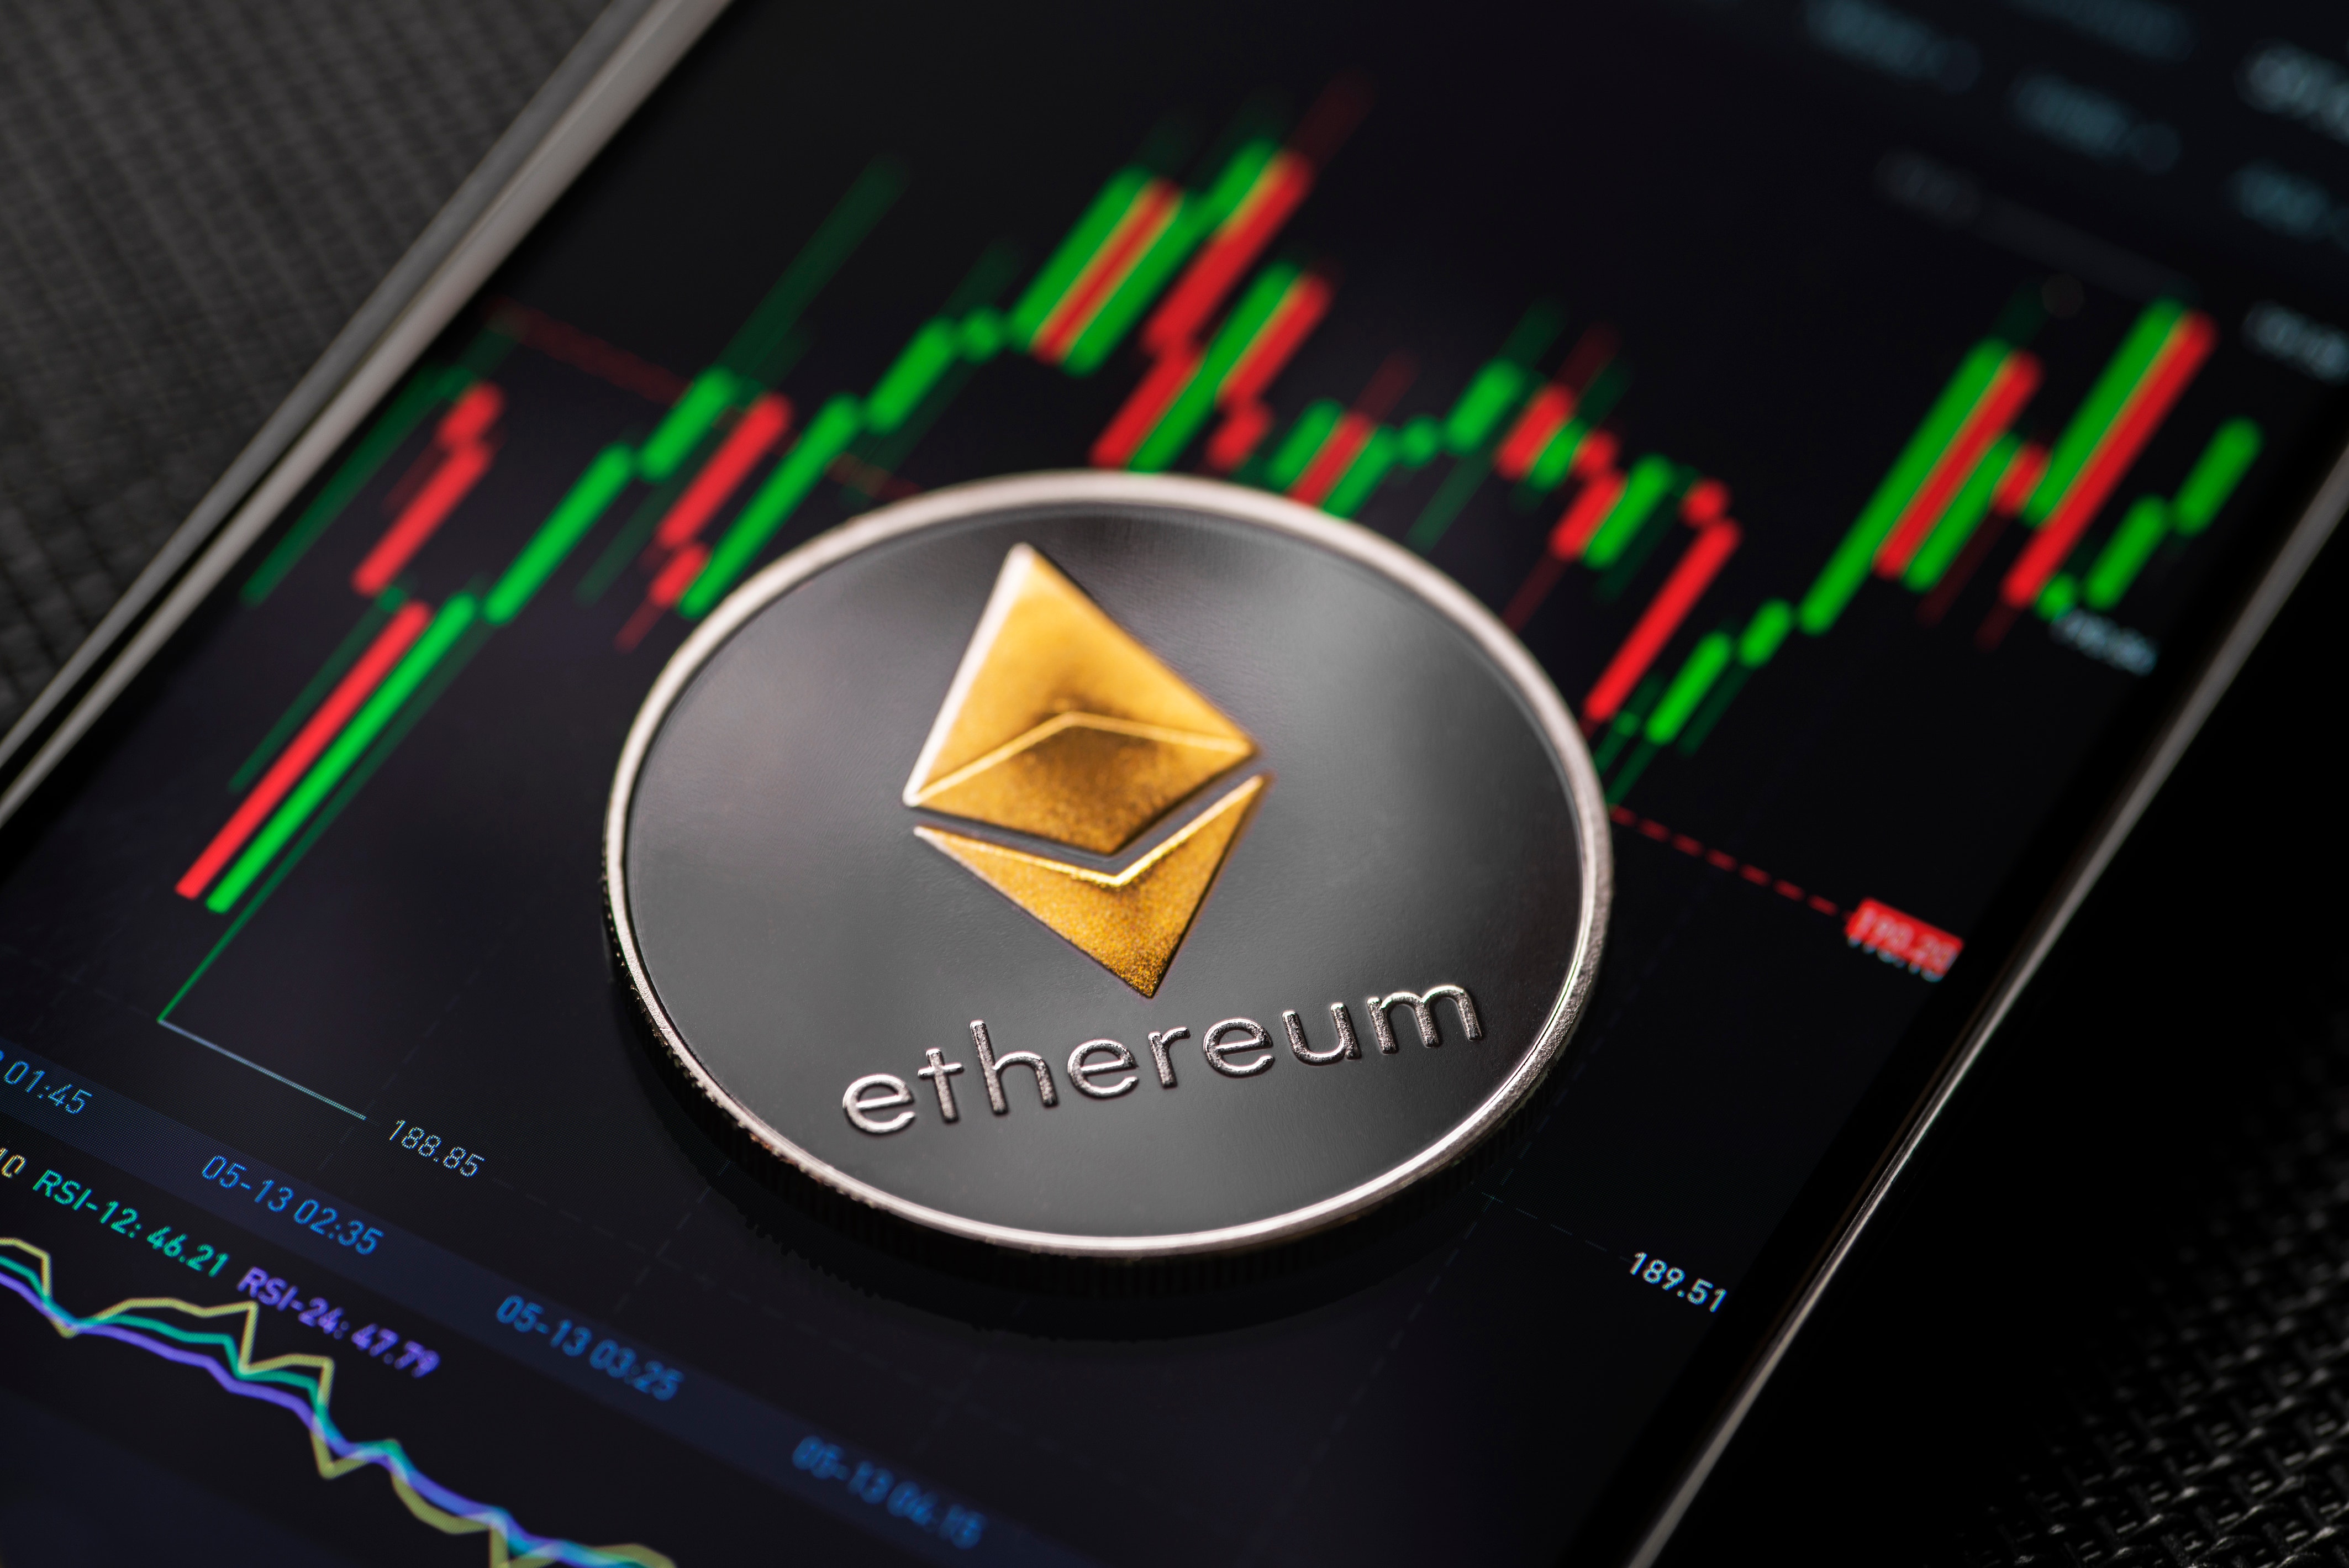 Ethereum Gains Outpace Bitcoin, Dogecoin Over Labor Day Weekend: Analyst Says Apex Crypto's Near-Term Outlook 'Not Looking Good'